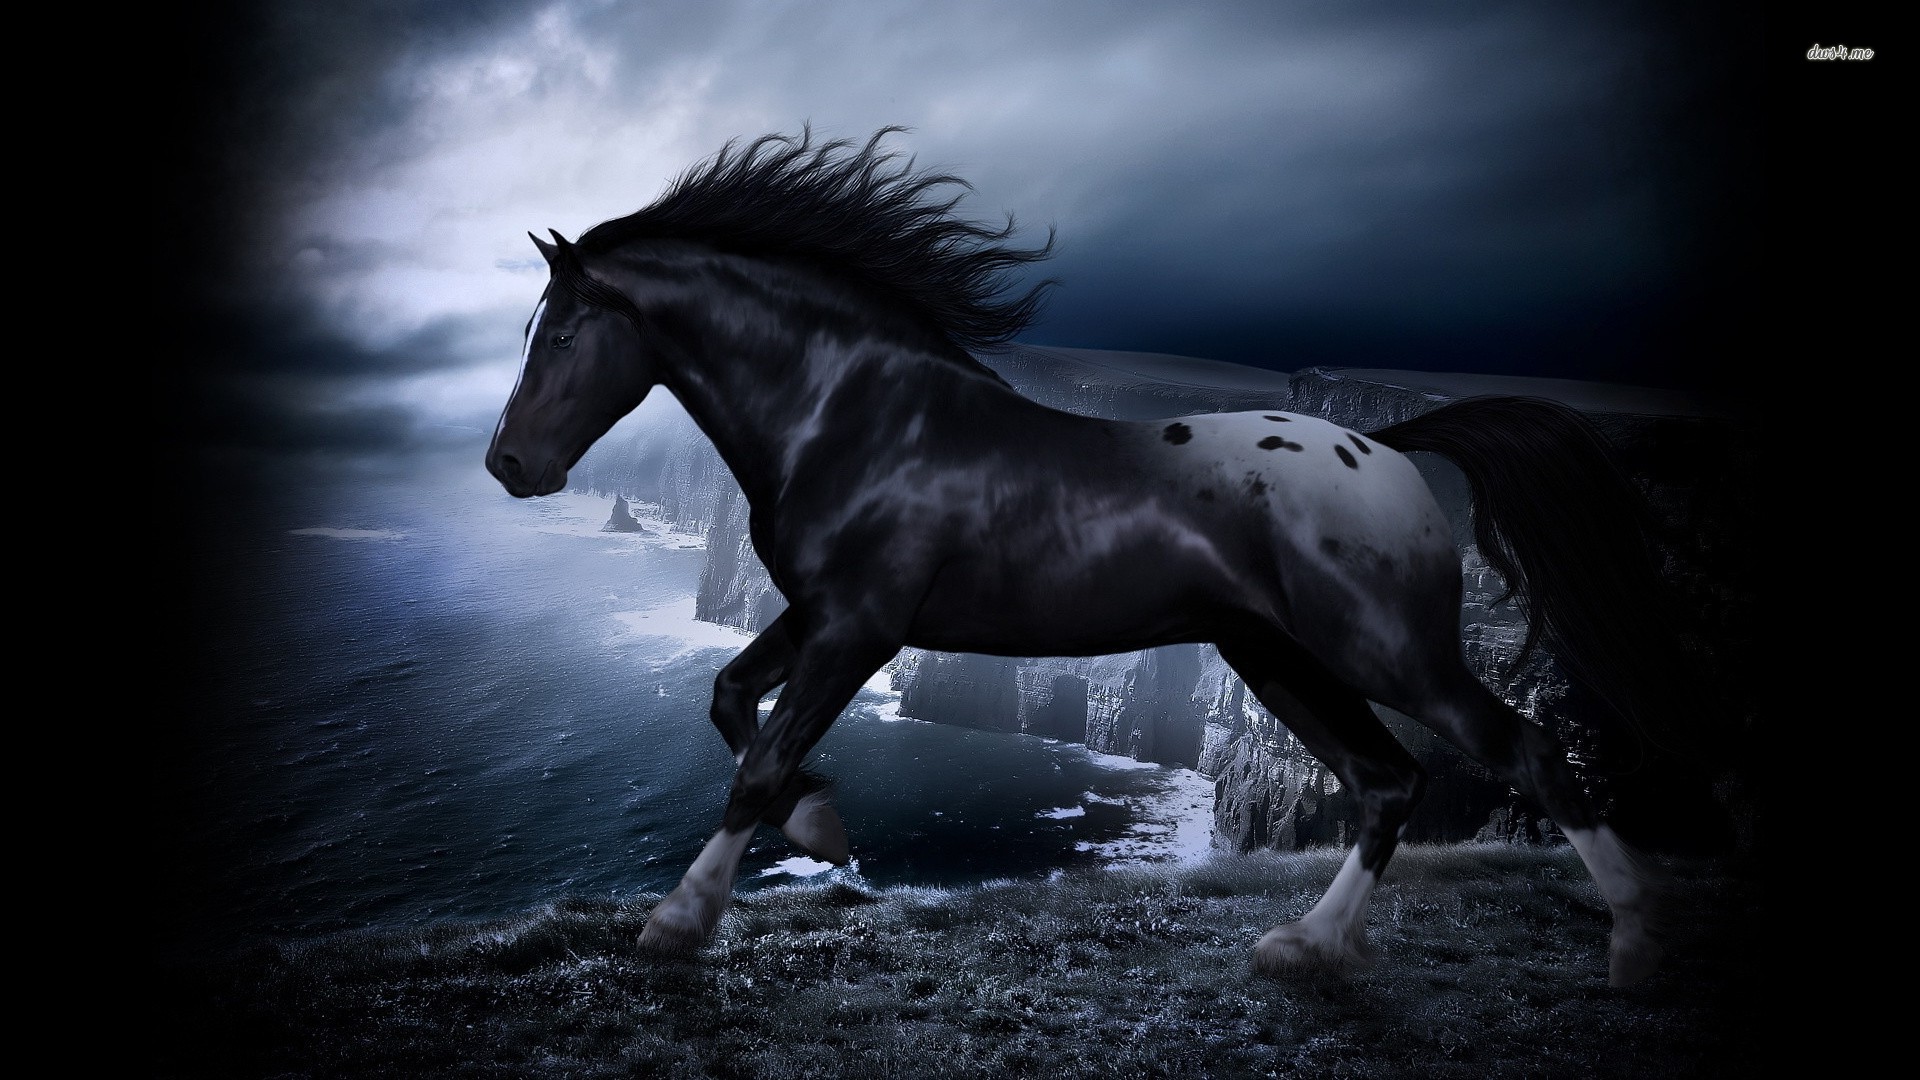 53,793 Black Horse Running Images, Stock Photos, 3D objects, & Vectors |  Shutterstock